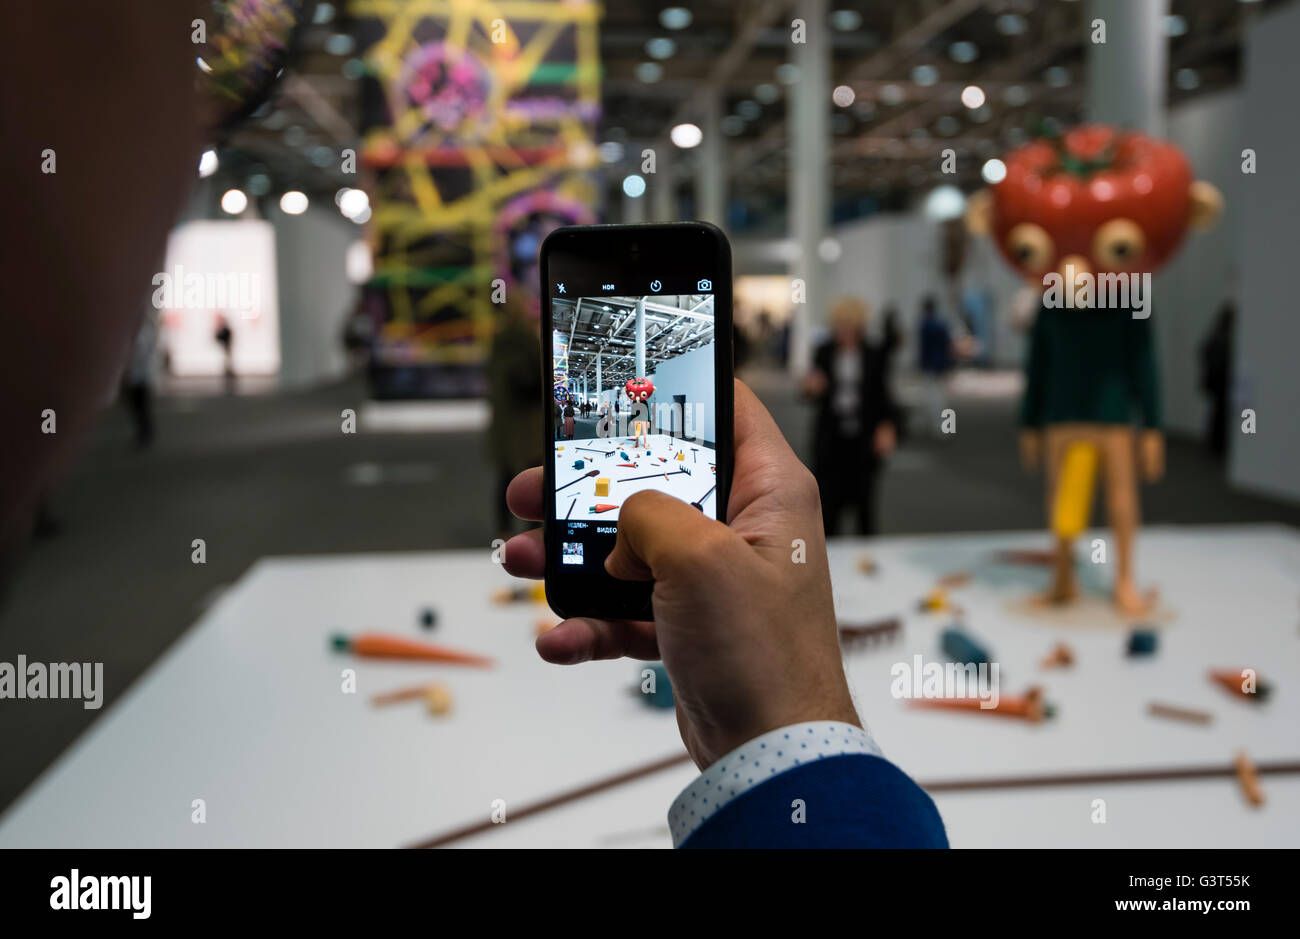 Basel, Switzerland. 14 June, 2016. A visitor is taking a picture of the sculpture 'Tomato Head (Green)' by Paul McCarthy at the opening of the modern art show 'Art Basel 2016' in Basel, Switzerland. With 280 galleries showing works from 4,000 artists, Art Basel is one of the world's largest and most spectacular gatherings for contemporary and modern art. In 2015, the show in Basel (which also has offshoots in Hong Kong and Miami) attracted 98,000 visitors from all over the world. Credit:  Erik Tham/Alamy Live News Stock Photo